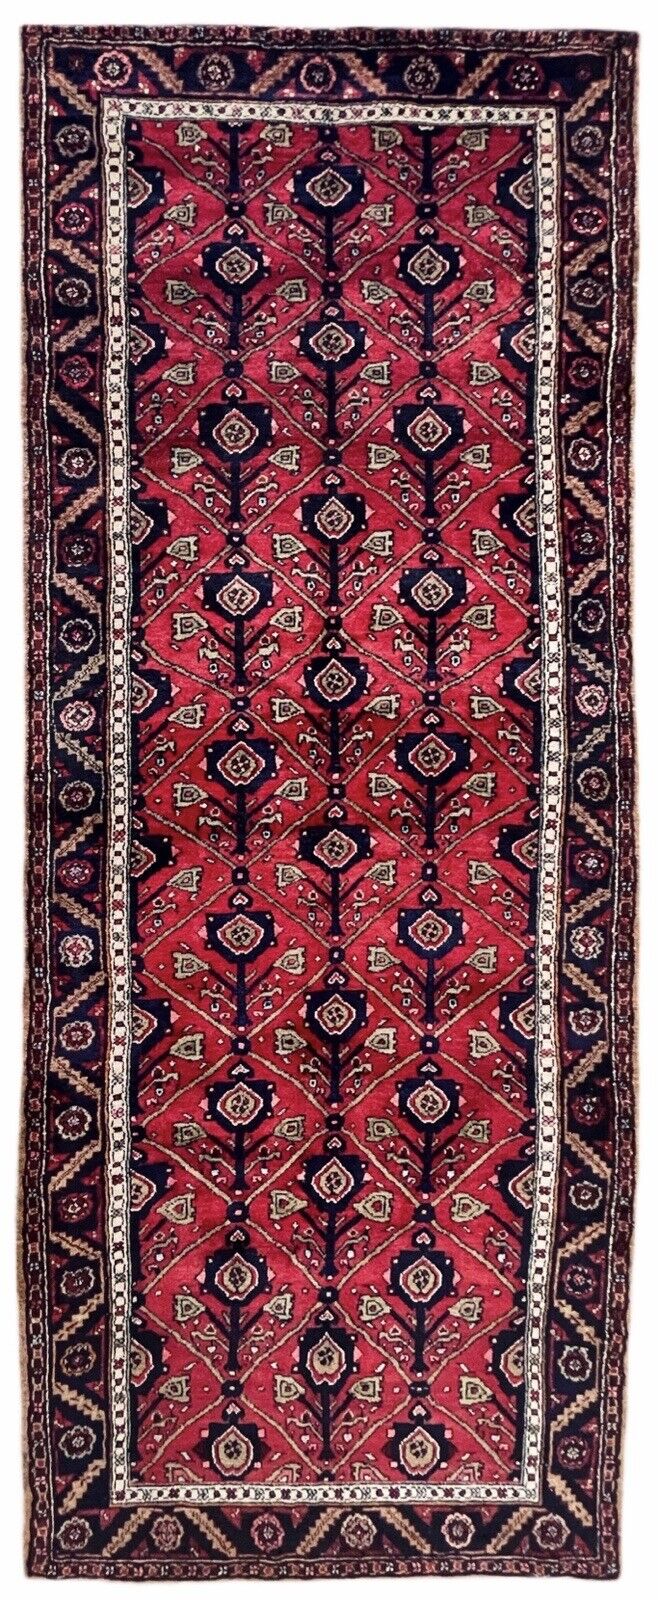 Traditional Vintage Antique Hand-Knotted Oriental Rug 3’ 8” x 9’ 2” (INV677)